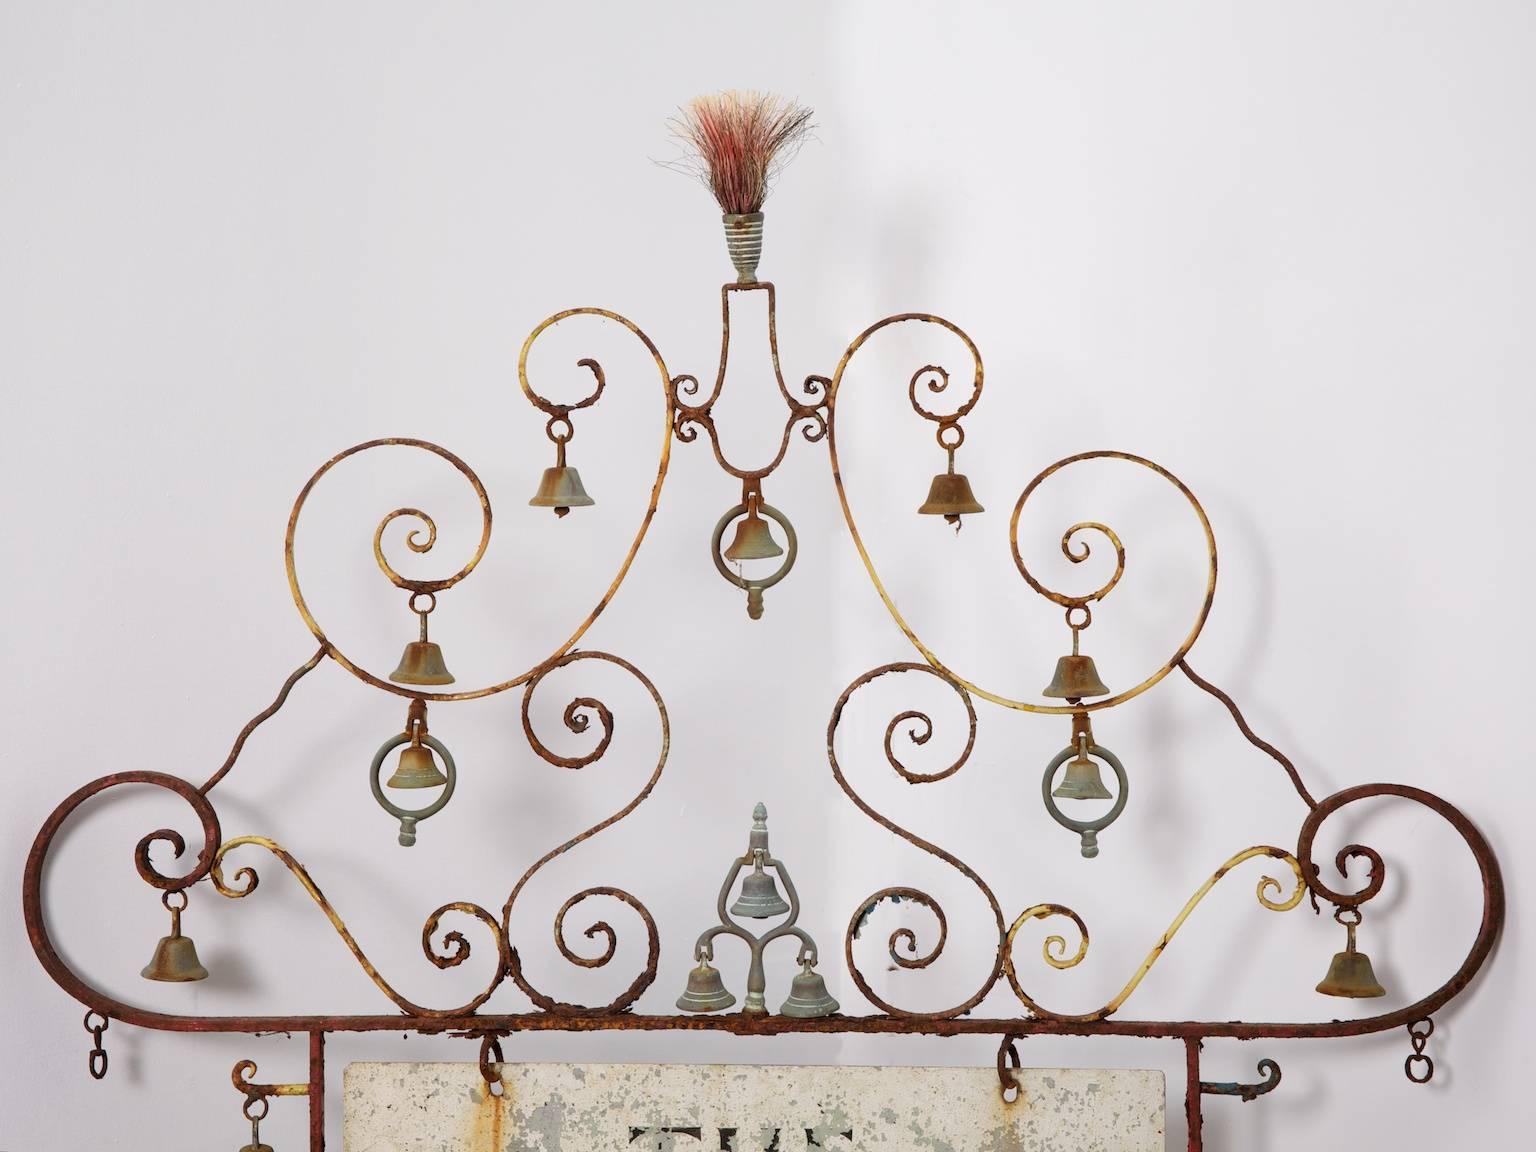 A double-sided hanging sign for the Cornwall Museum of Smuggling in Polperro, Cornwall.

The painted wrought iron frame with handwritten double sided alloy signage, numerous brass bells and spring or brush decoration to the top.

A wonderful